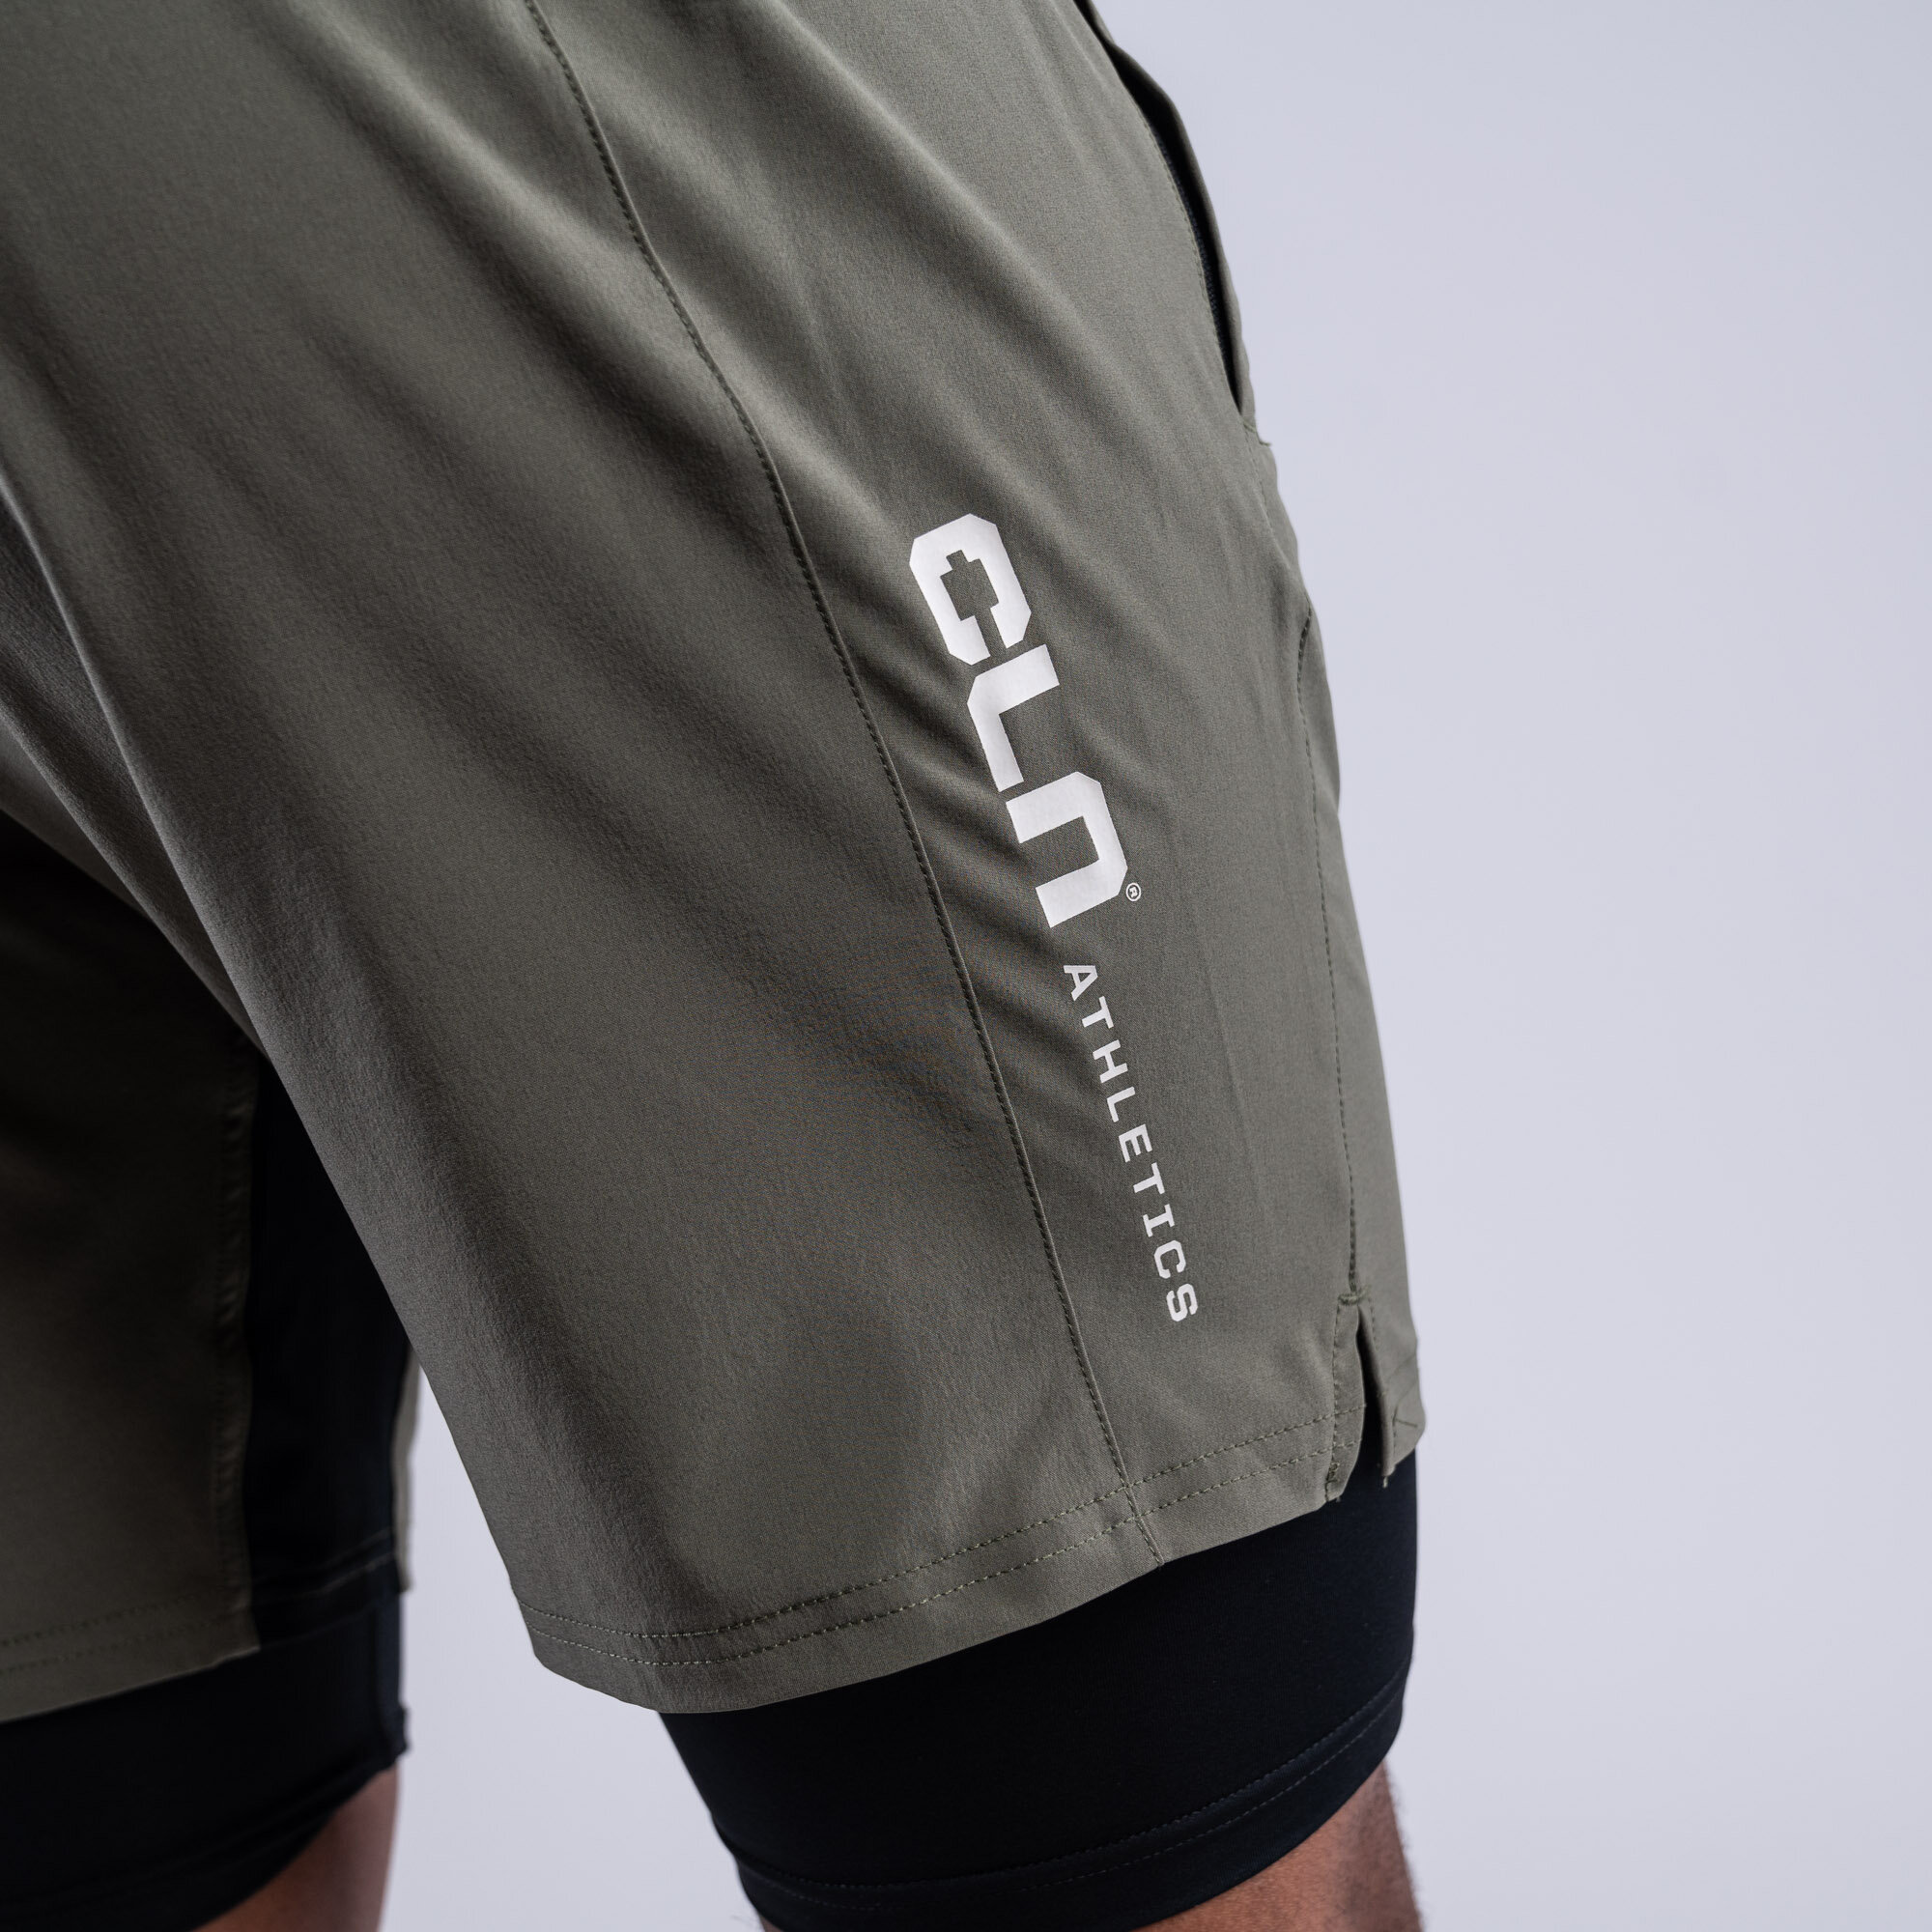 CLN Rep 2 in 1 shorts Dusty olive